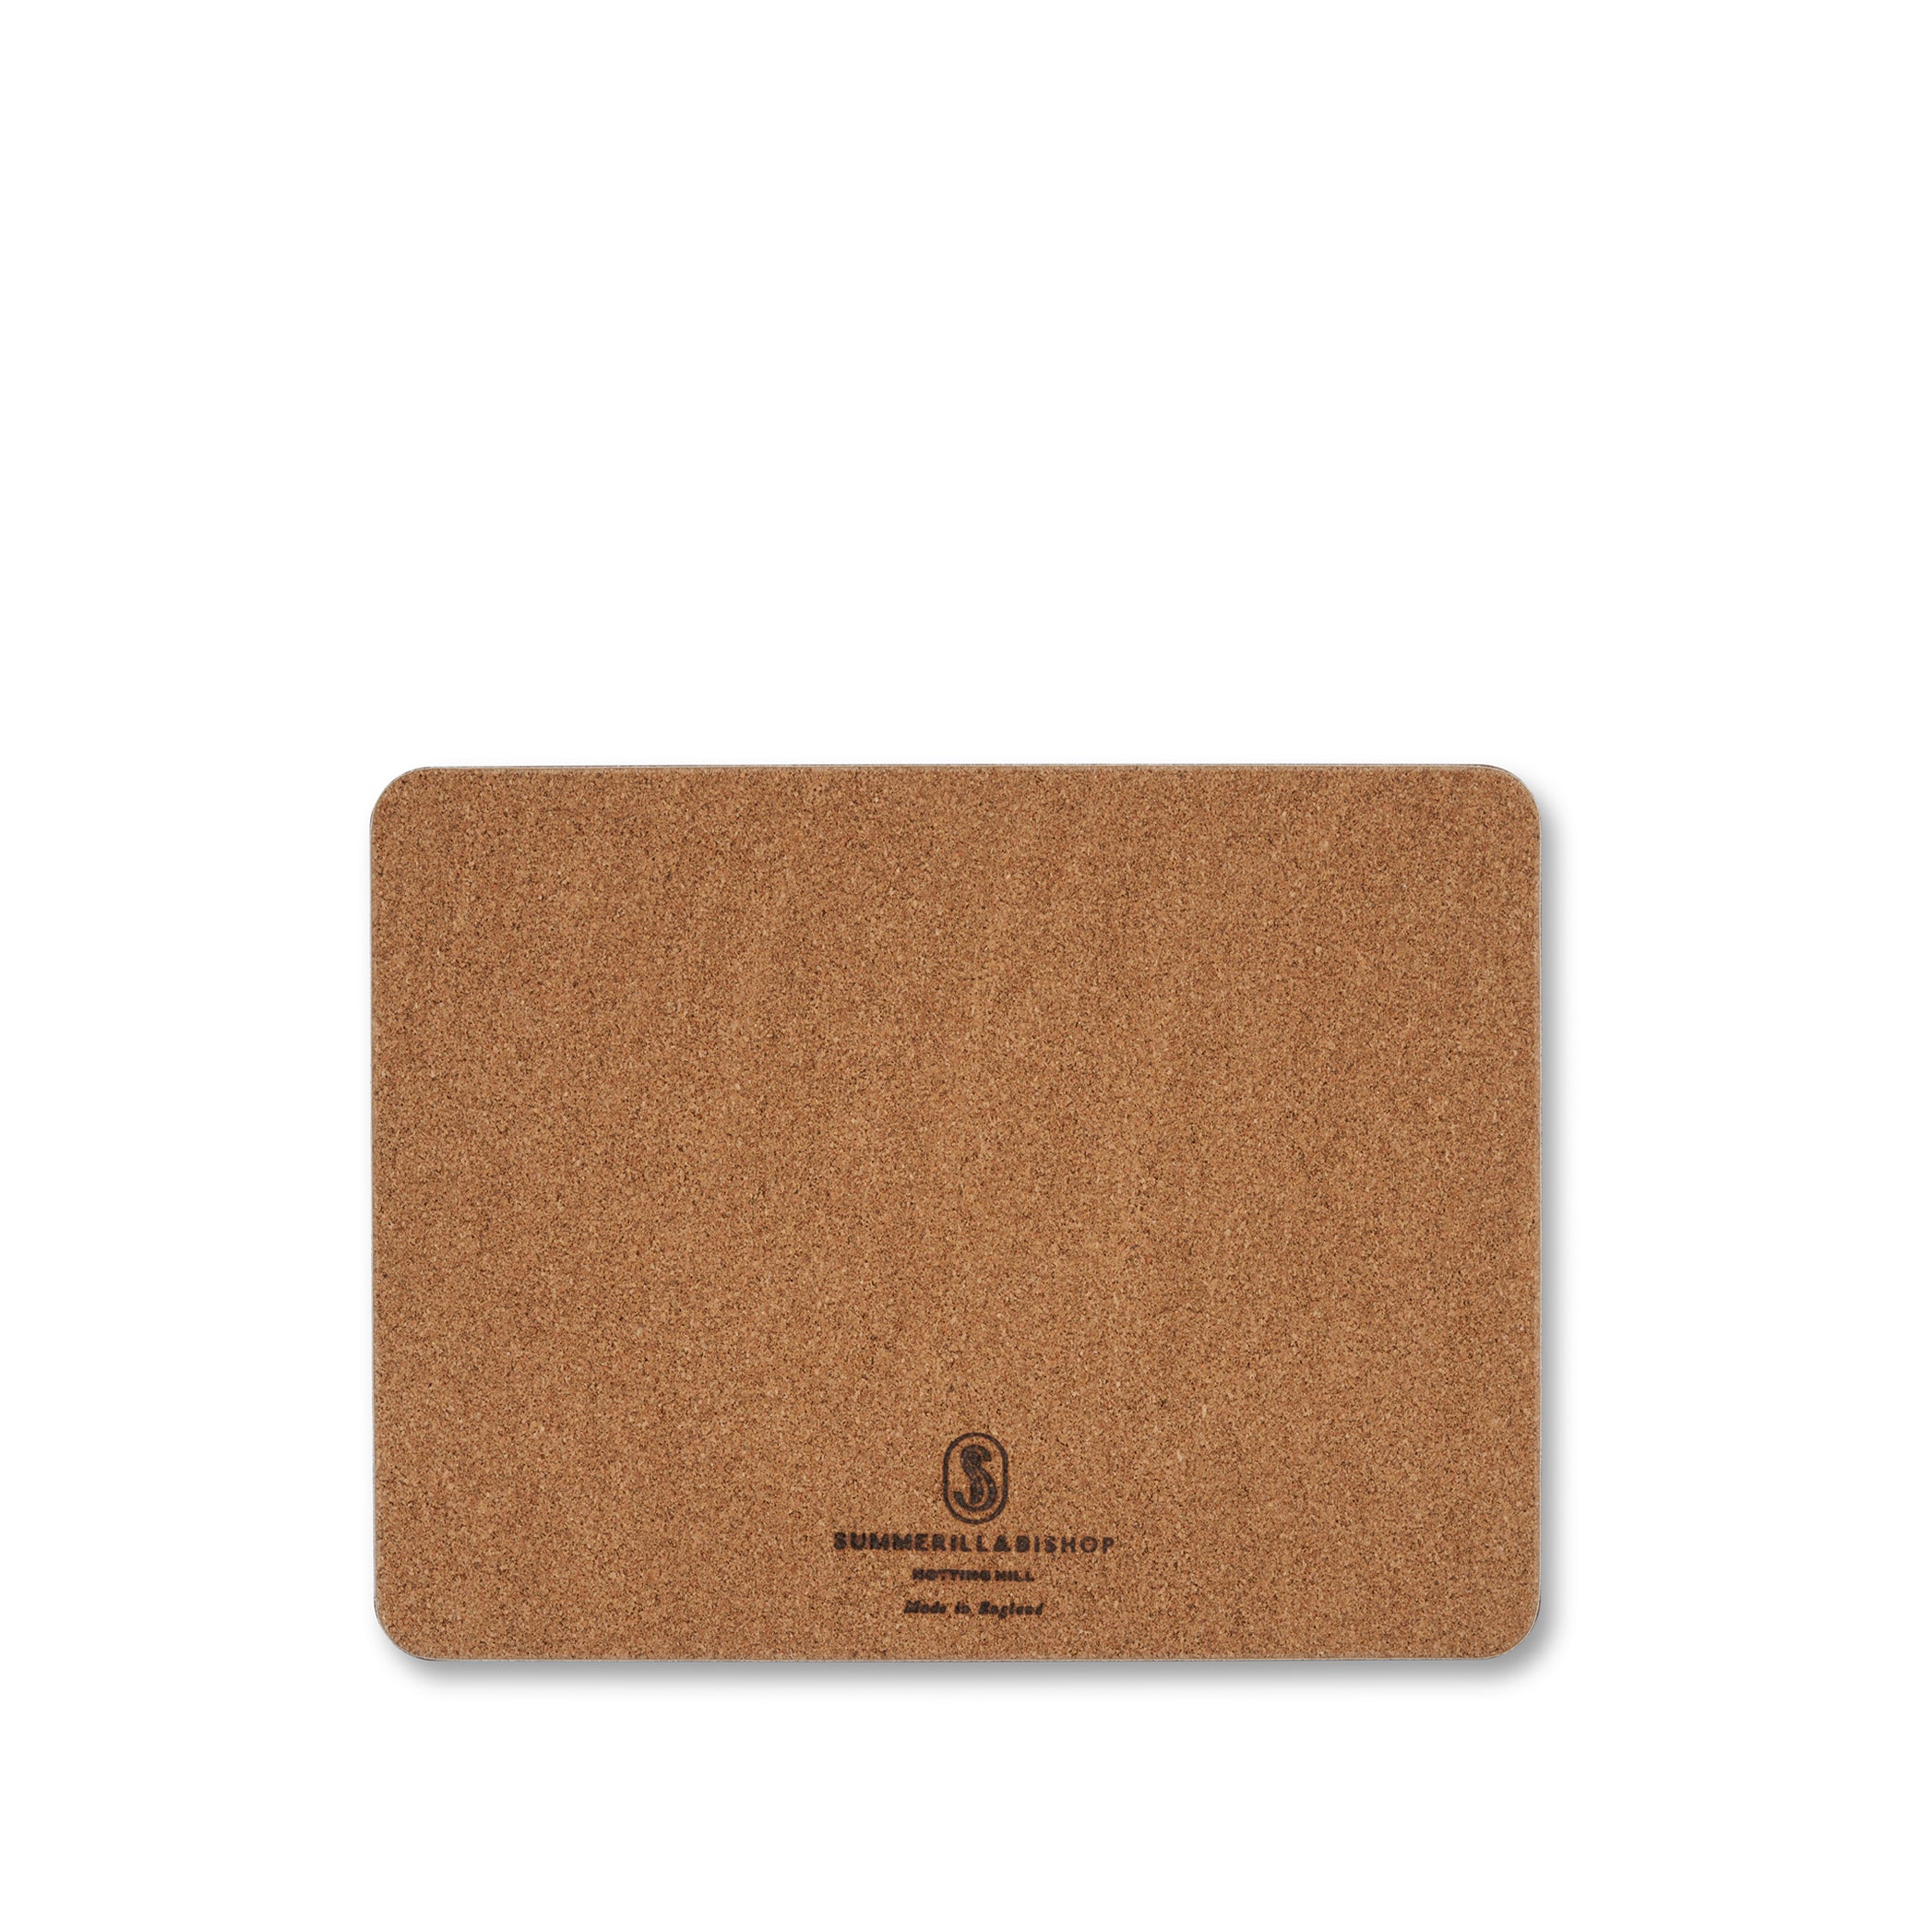 S&B Marble Cork-Backed Placemat in Green, Rose Pink & Orange